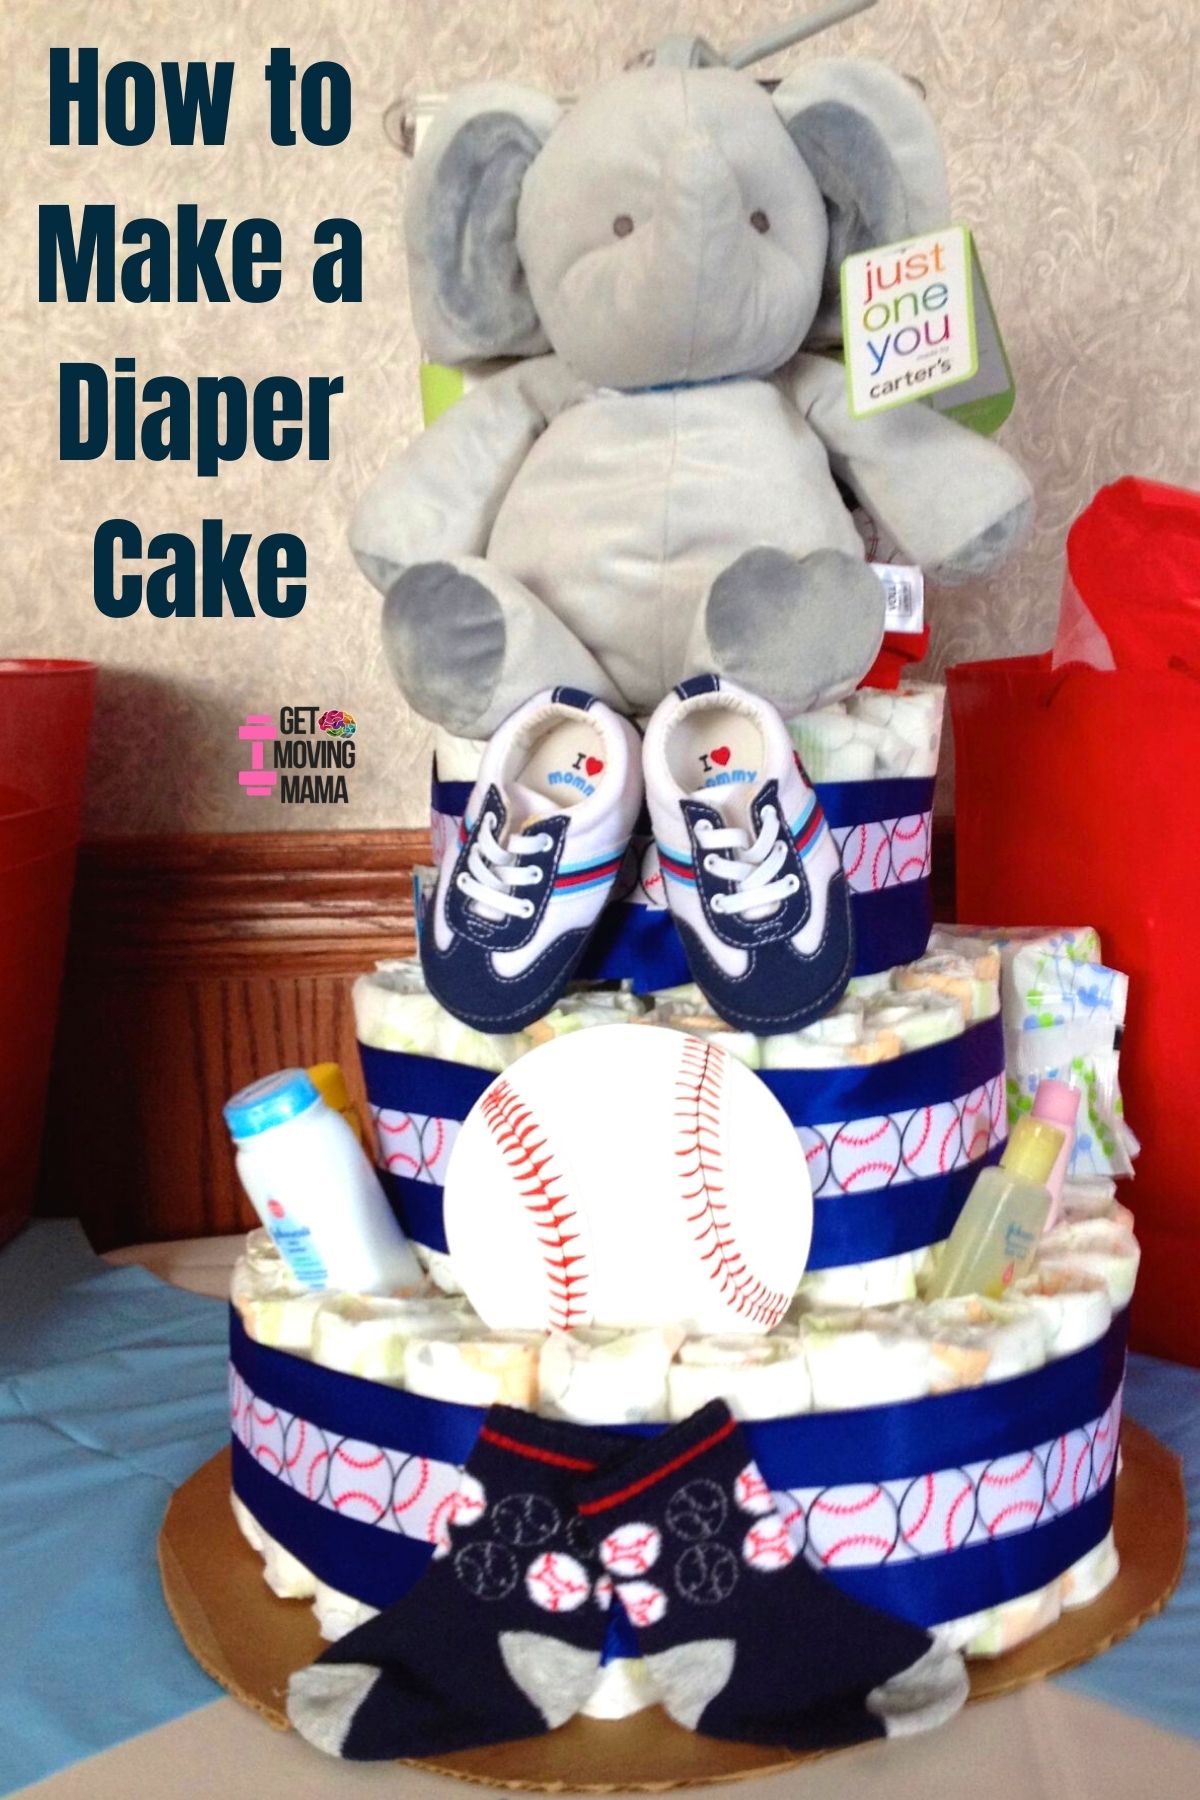 A picture of a diaper cake with a baseball theme for a boy baby shower gift.